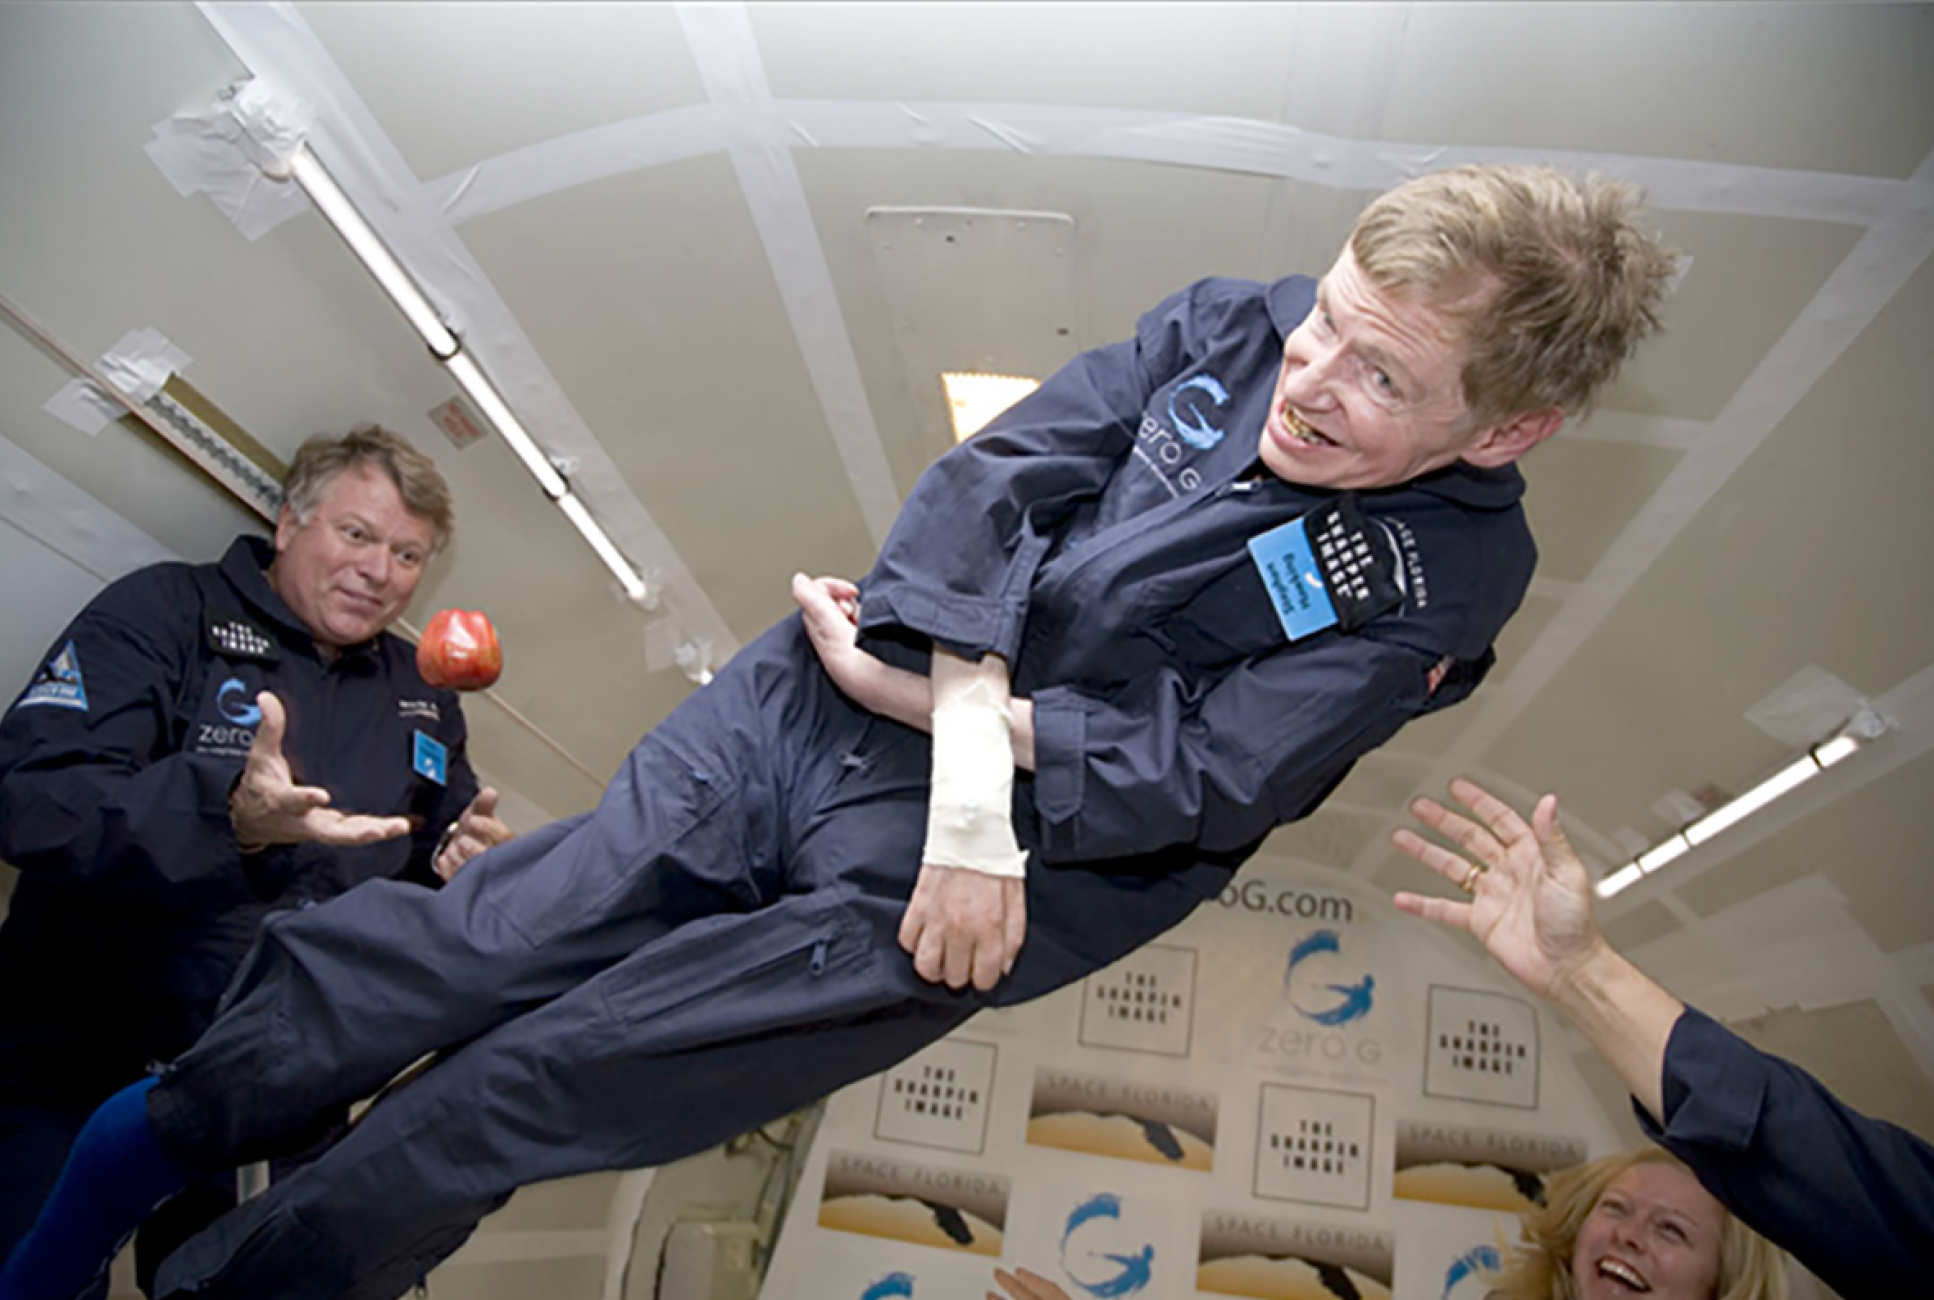 Professor Chilvers was also personal physician to renowned physicist Professor Stephen Hawking, traveling with him on his 2007 ‘zero gravity’ flight.